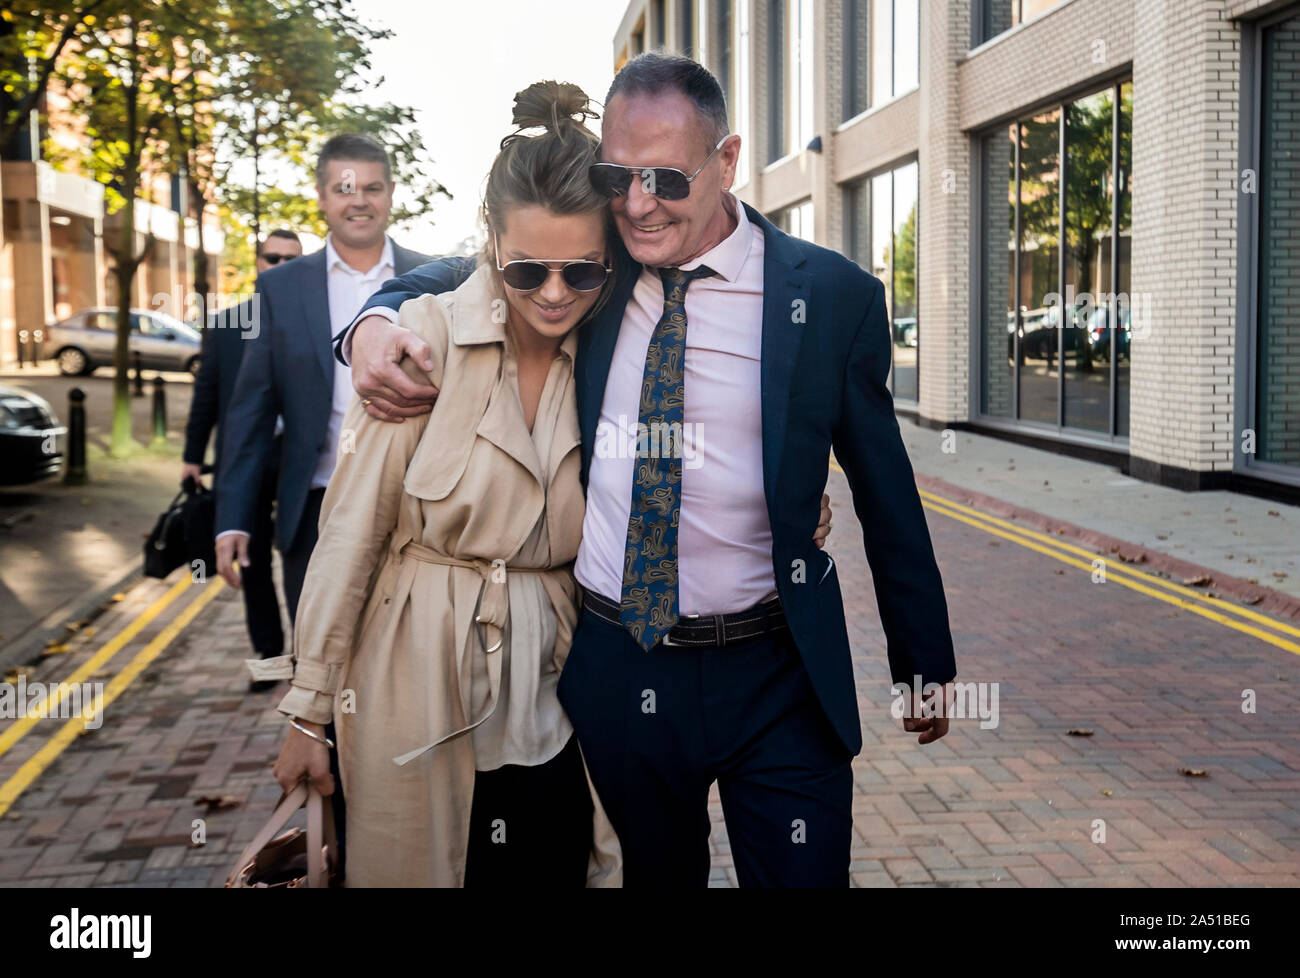 Former England footballer Paul Gascoigne with Katie Davies, Personal Manager for Paul Gascoigne M&N Management, leaving Teesside Crown Court, Middlesbrough, after he was cleared of all charges of sexually assaulting a woman on a train. Stock Photo